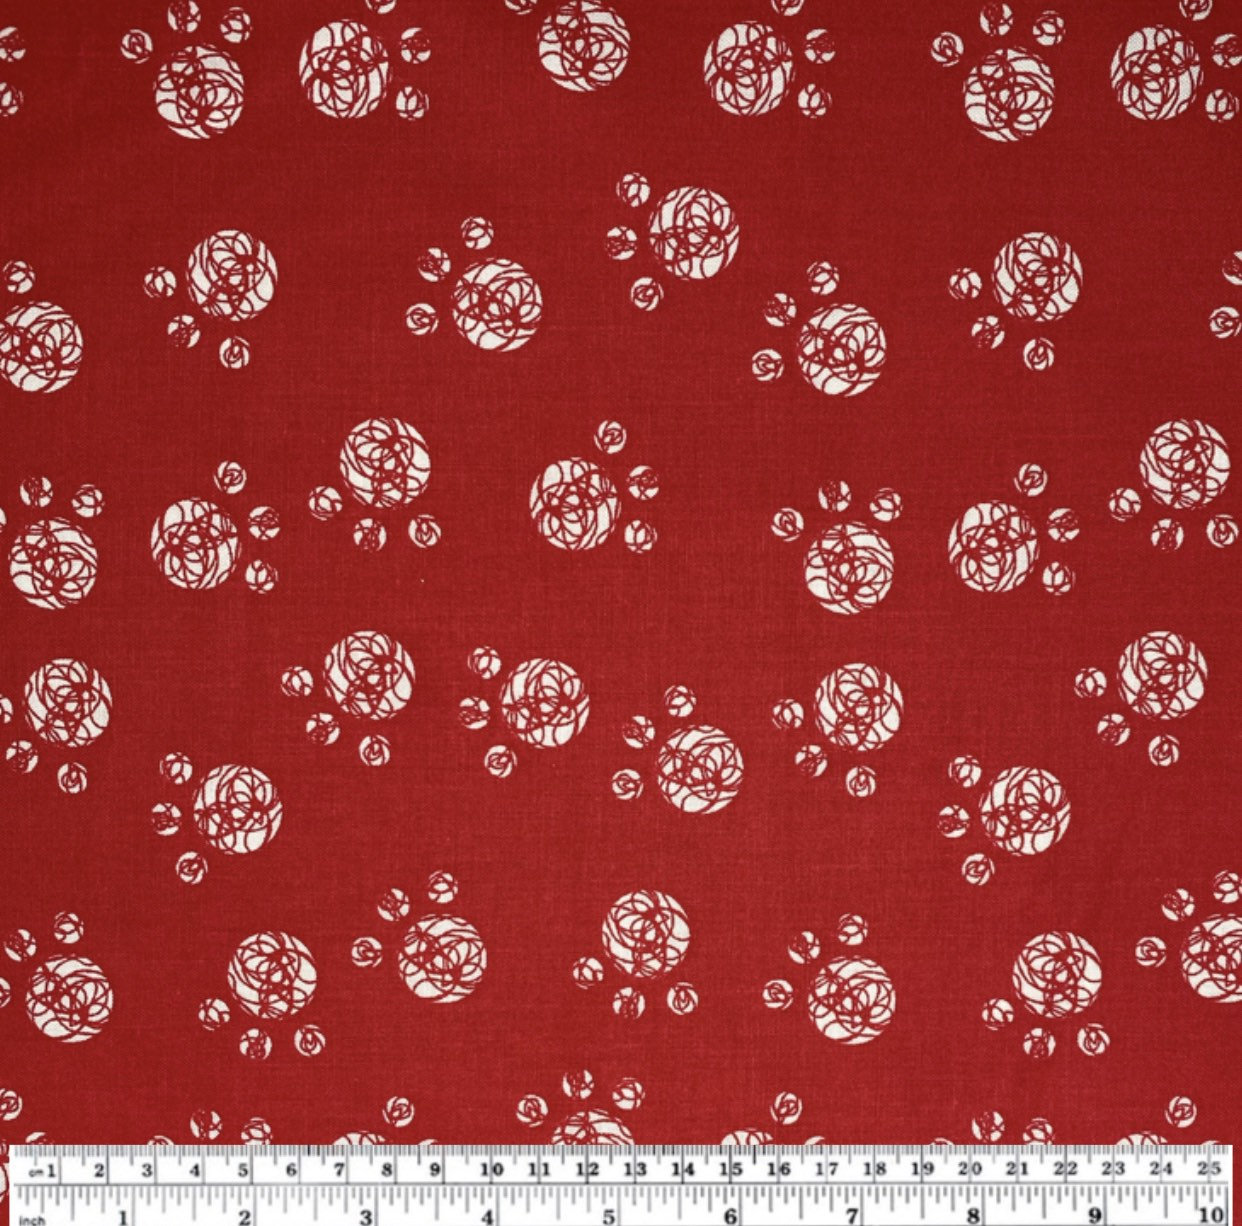 Quilting Cotton - Paw Prints - Red/White